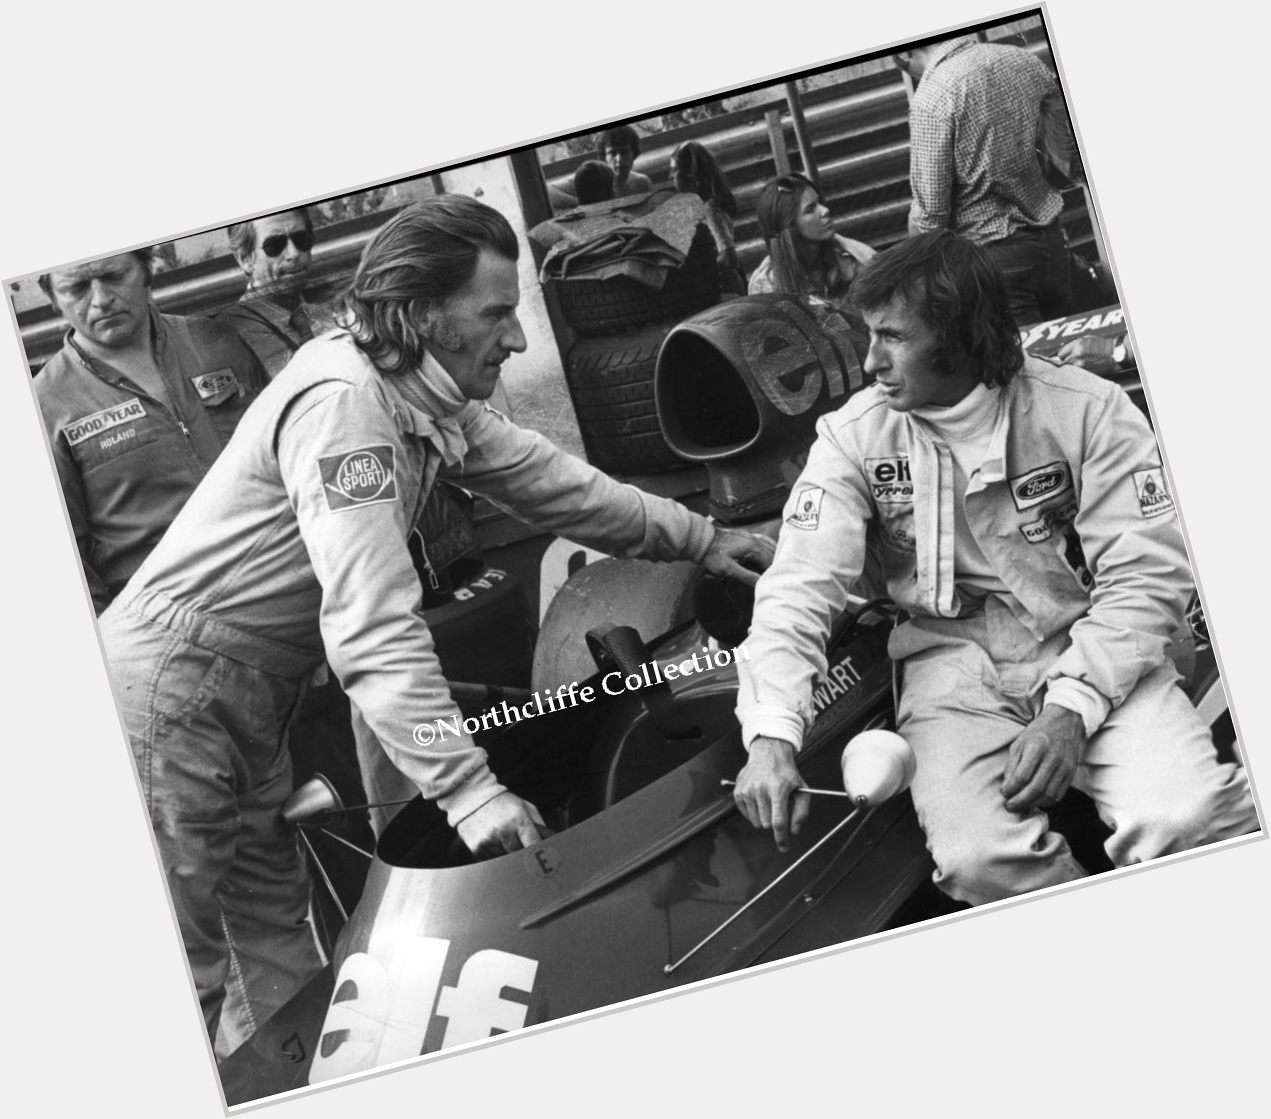 Happy 82nd Birthday to Sir Jackie Stewart: 3 time World Champion.   Shown here with Graham Hill in 1973 